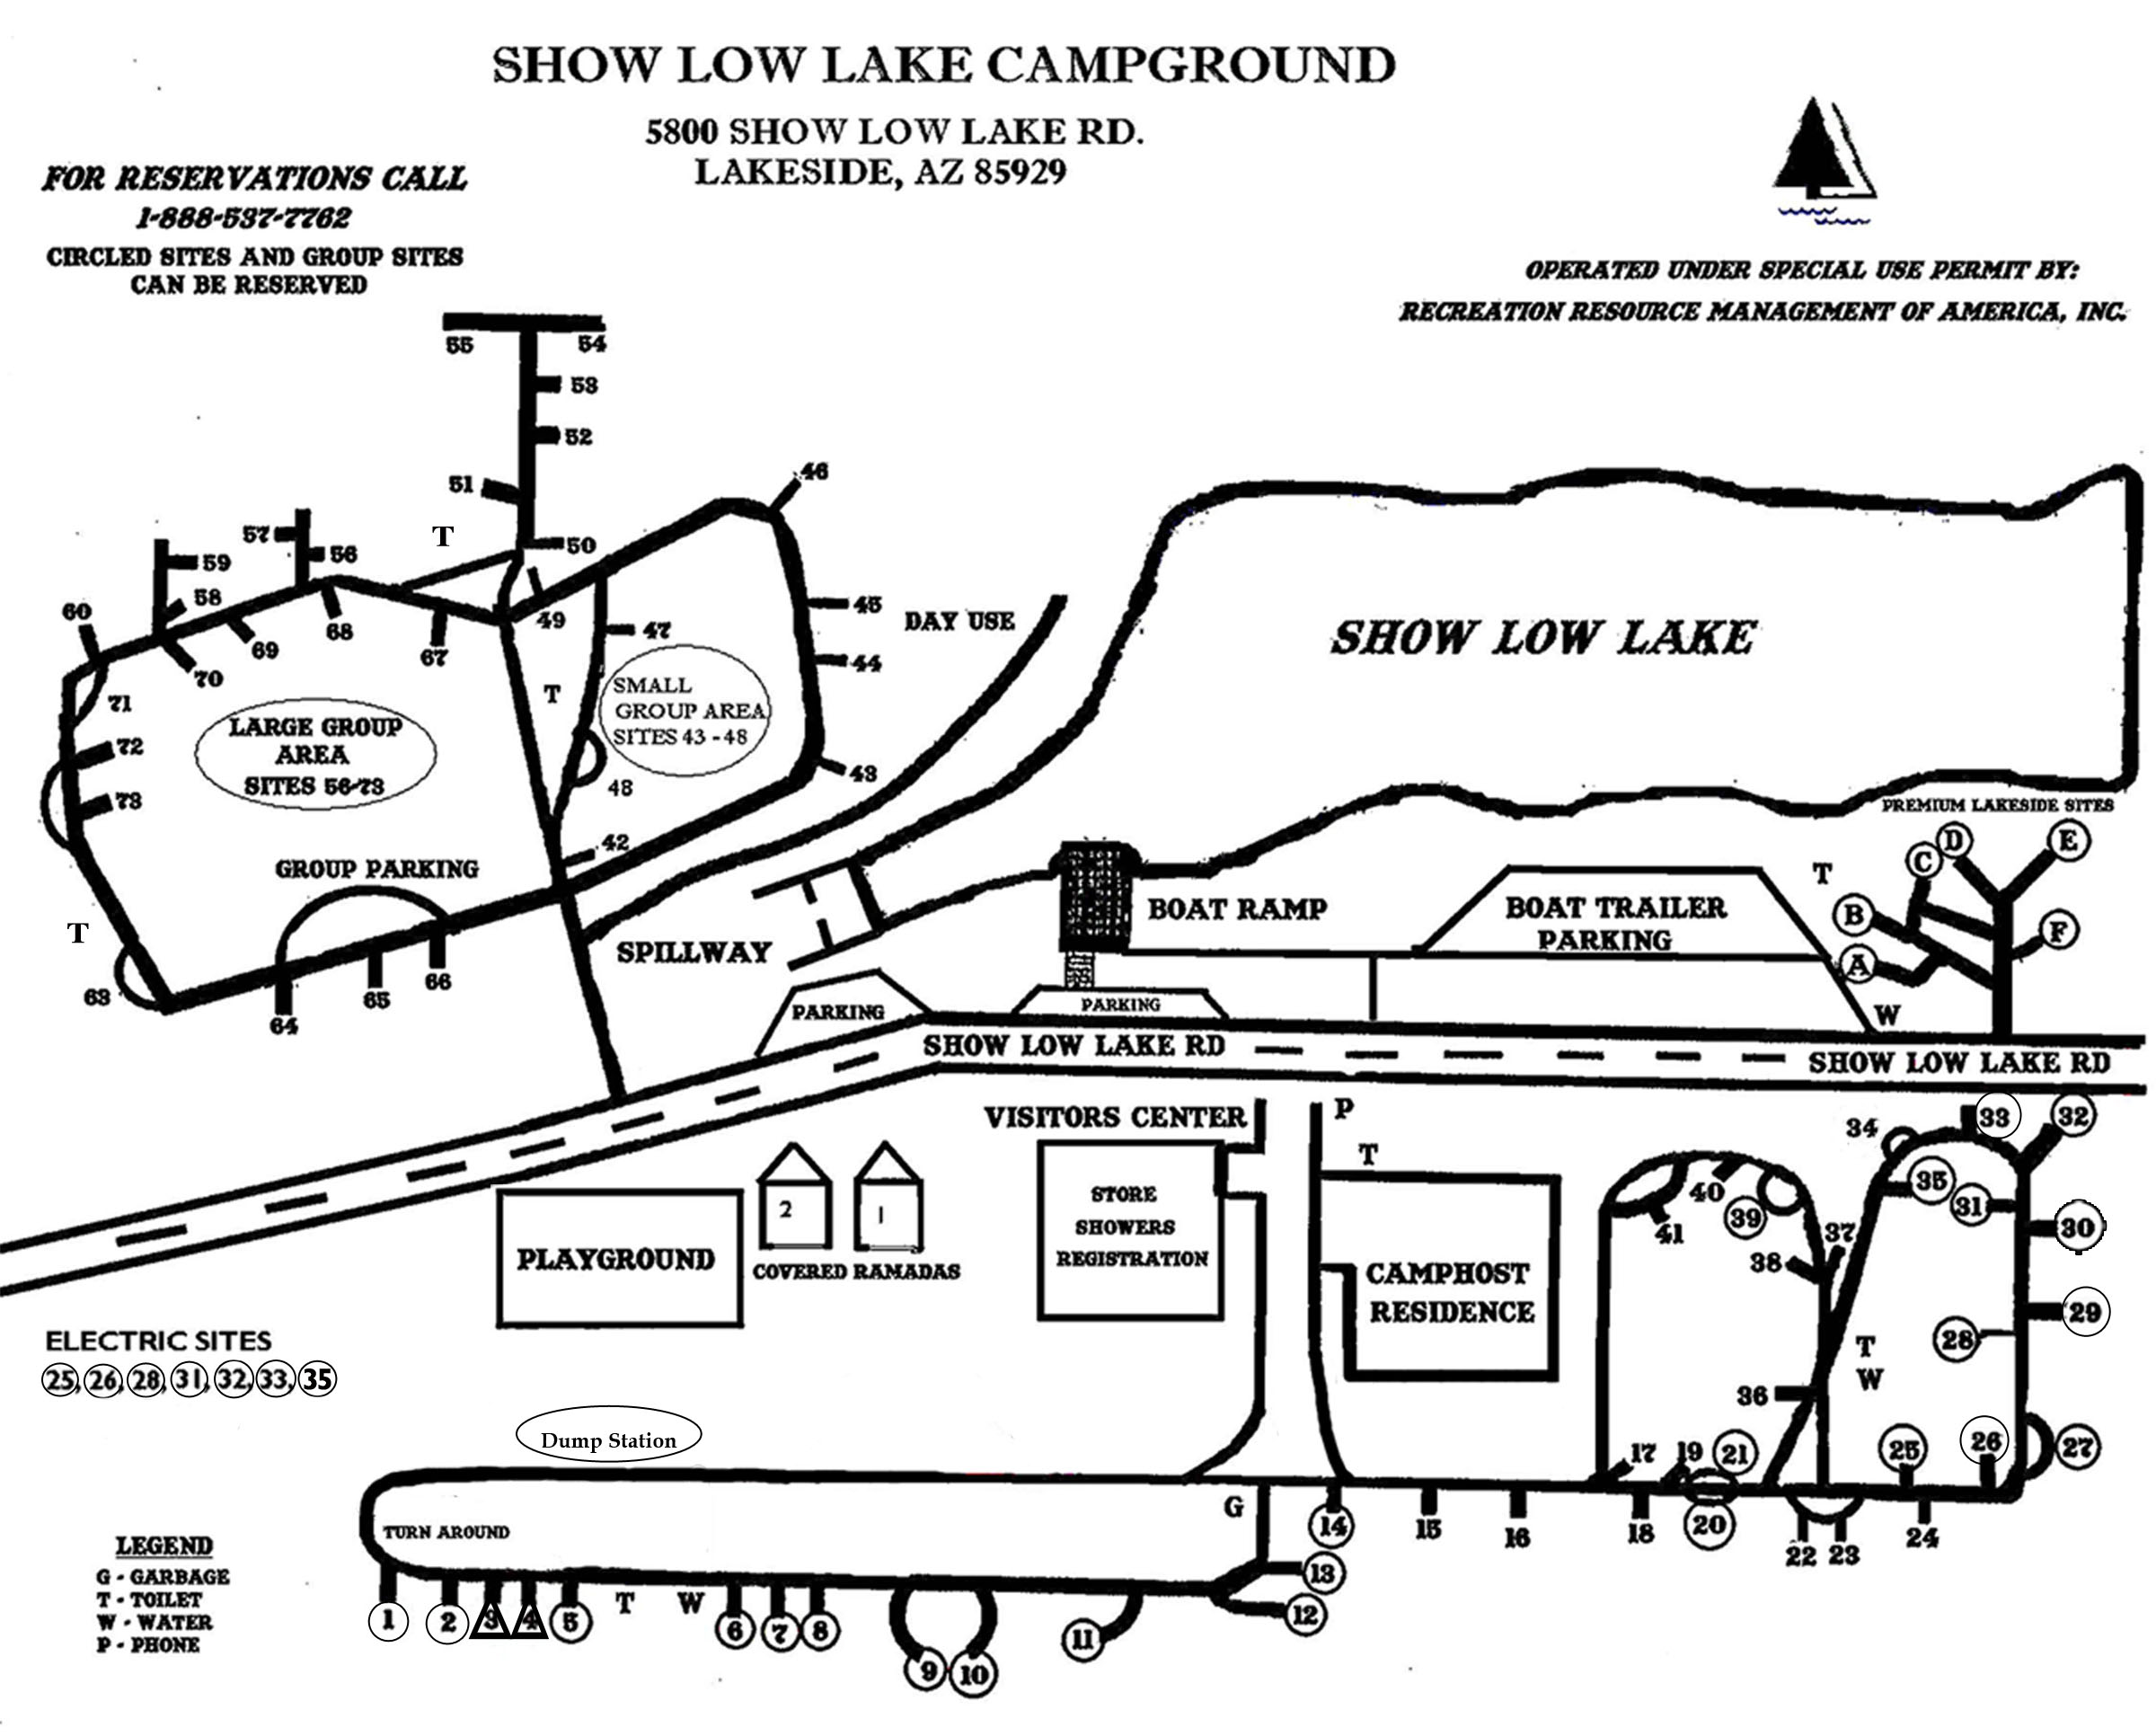 Show Low Lake Campground Site Map